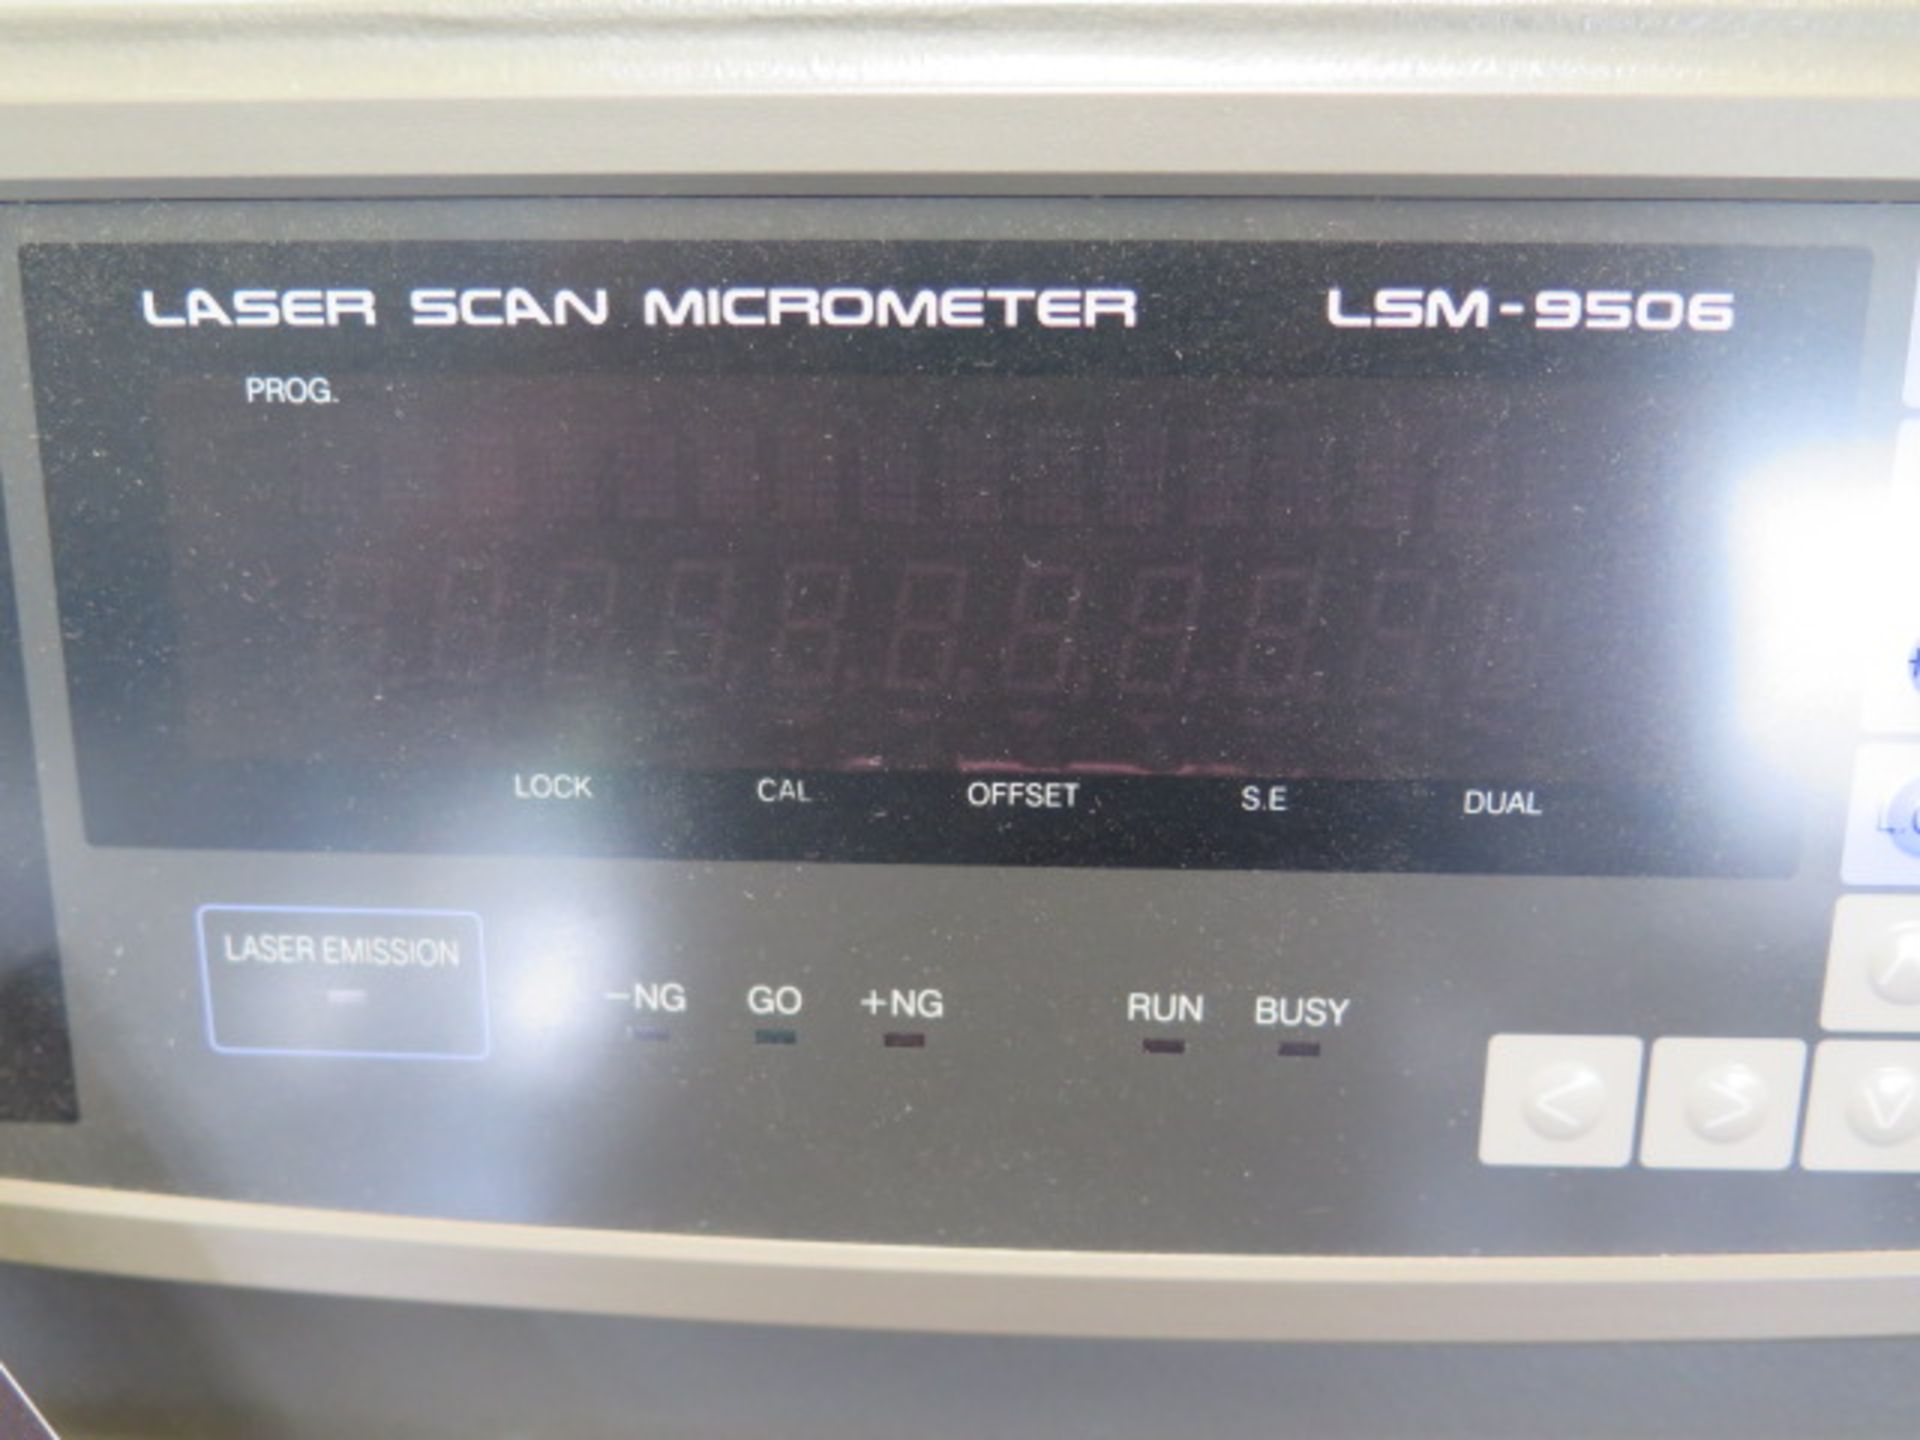 Mitutoyo LSM-9506 mdl. 544-116-1A Laser Scan Mictometer s/n 402108 (SOLD AS-IS - NO WARRANTY) - Image 5 of 13